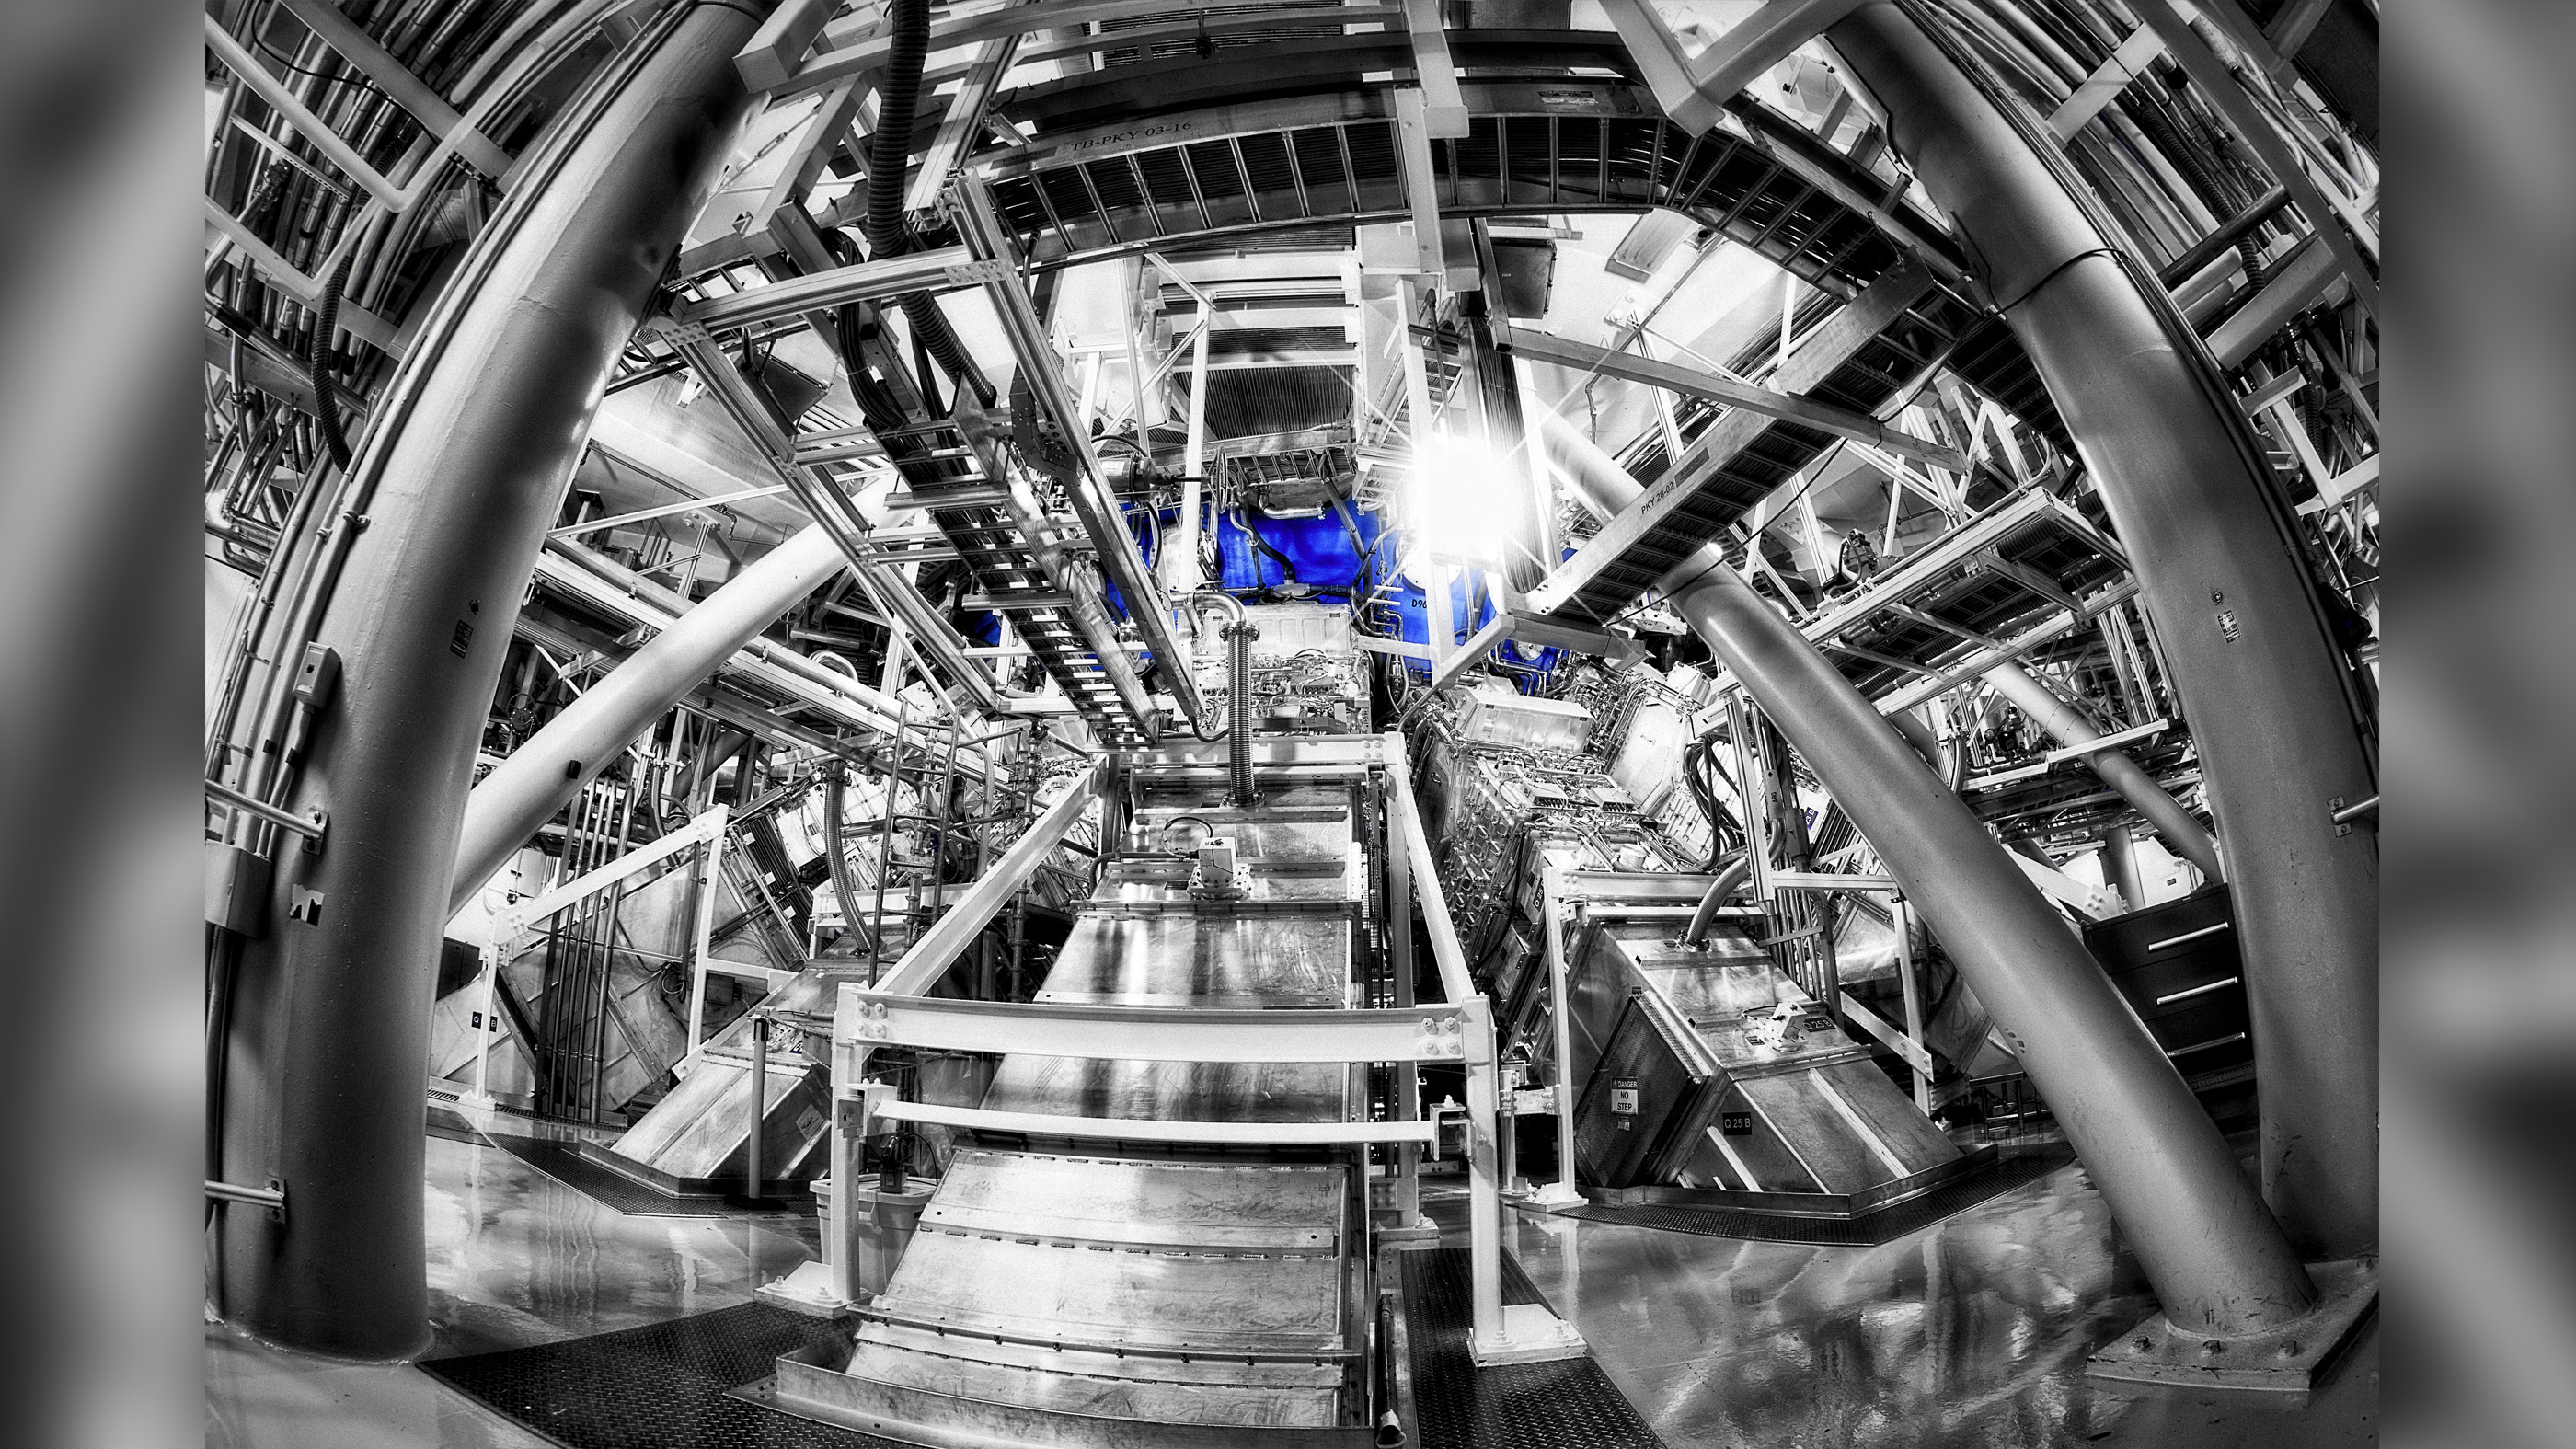 Damien Jemison, photographer at the National Ignition Facility (NIF), captured this image of the NIF laser beam lines entering a part of the target chamber. Jemison needed five exposures to capture the range of light in the dimly lit spot. He also converted the resulting image to monotone, saying "The end result is my artistic view of how I feel when standing face-to-face with the highest-energy laser in the world."